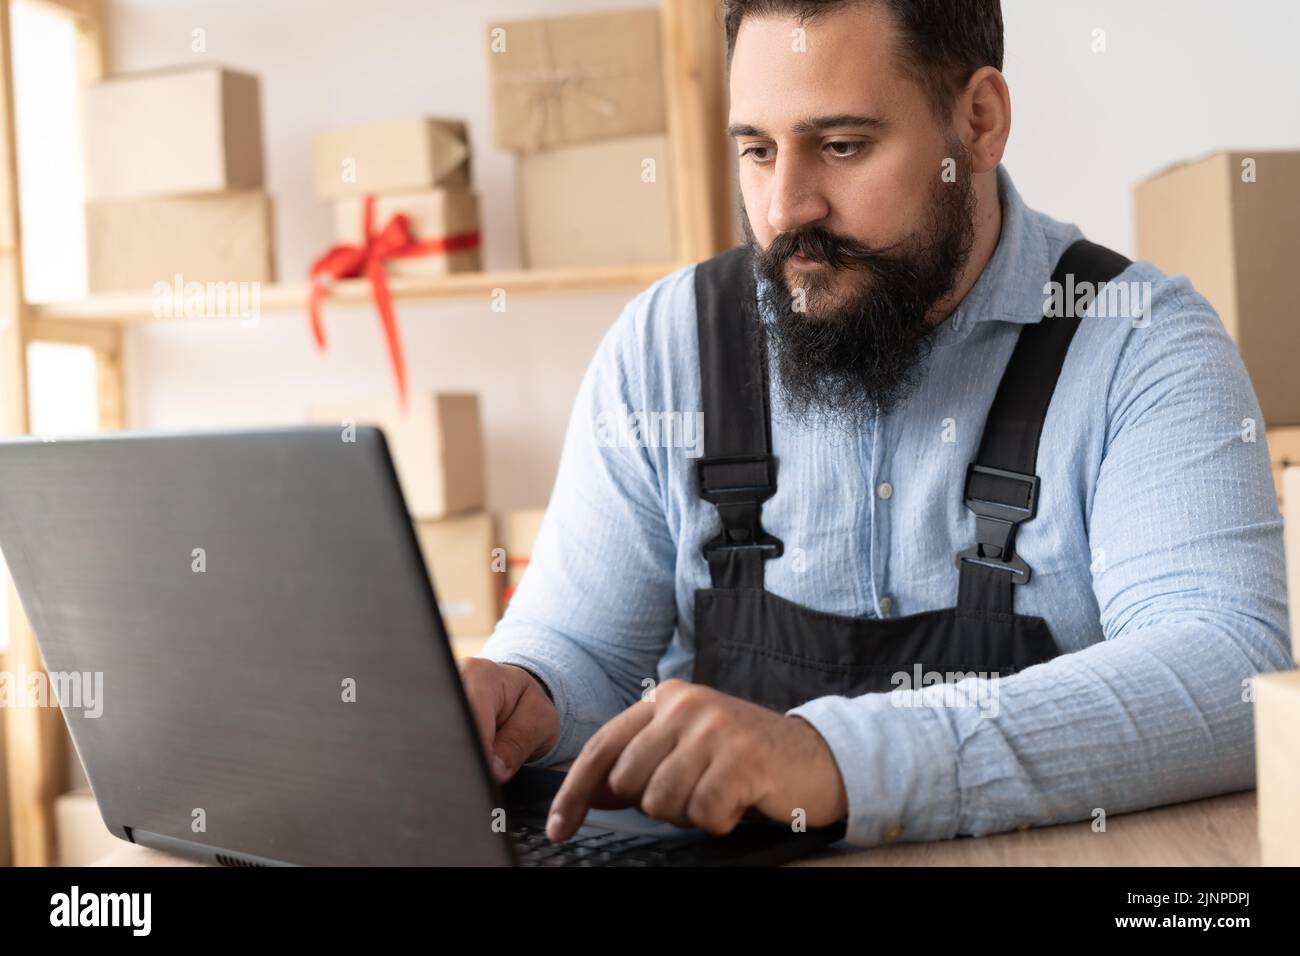 Small business aspiring entrepreneur, small and medium business freelance worker working in a home office man in overalls sits at a table and accepts Stock Photo